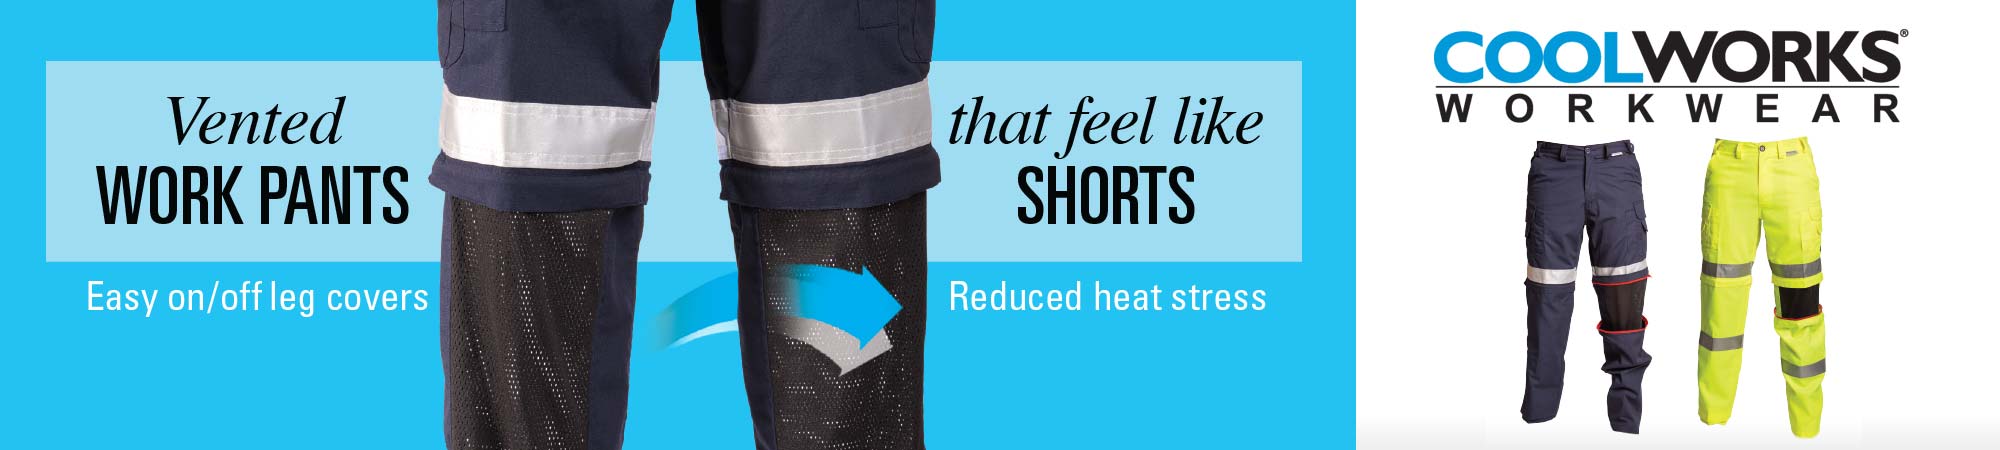 Vented Work Pants that feel like Shorts. Coolworks® Workwear